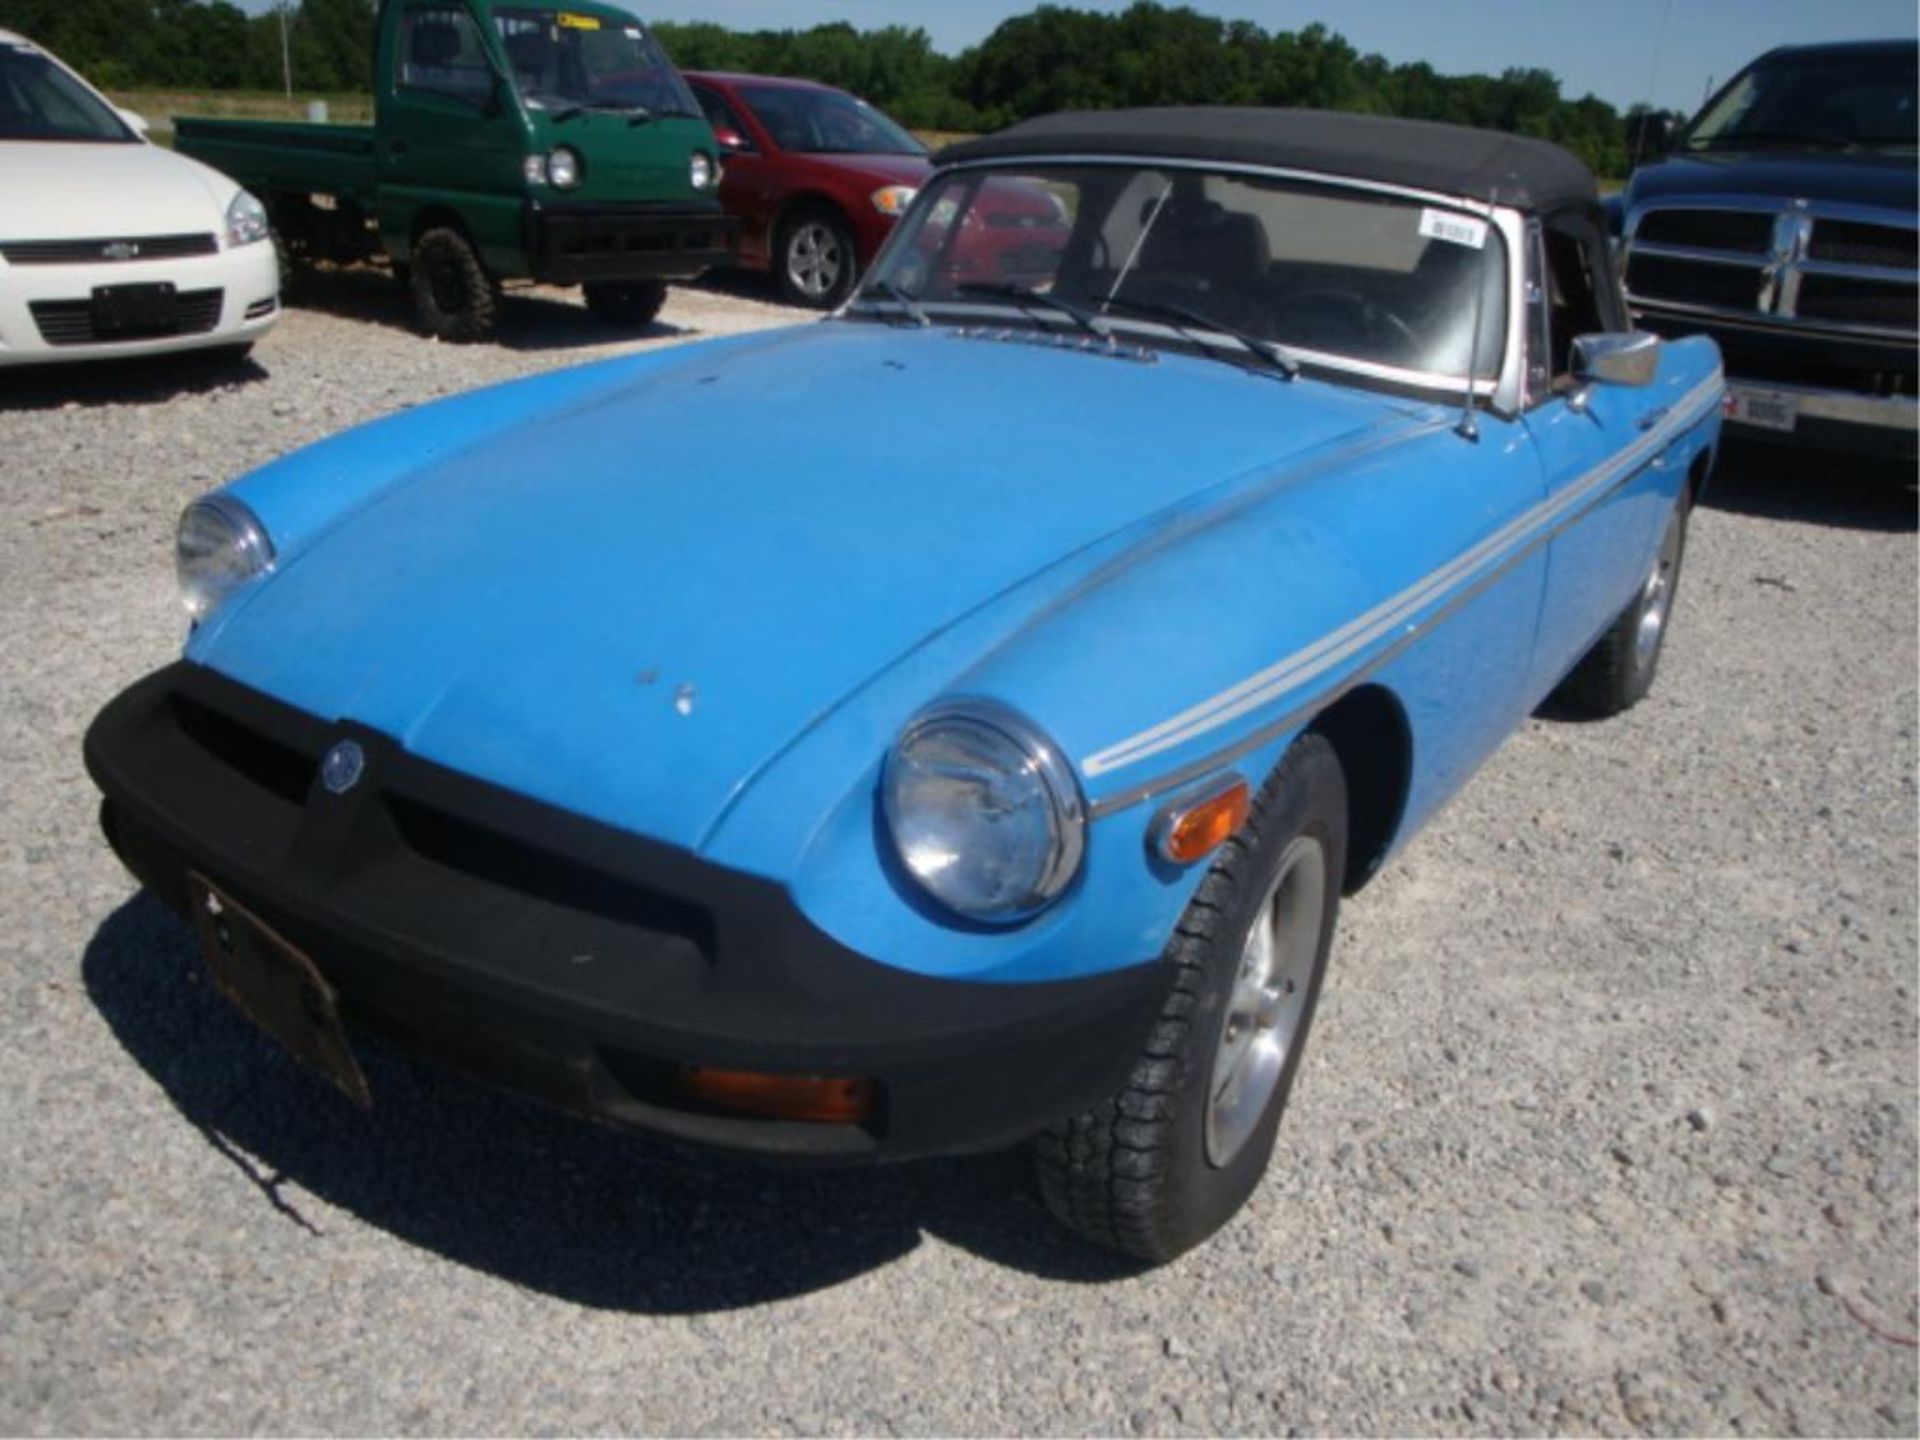 (Title) 1979 MGB, 14,890 miles on ODO,New in 2014: fuel pump, gas tank, clutch, radiator rodded - Image 3 of 34